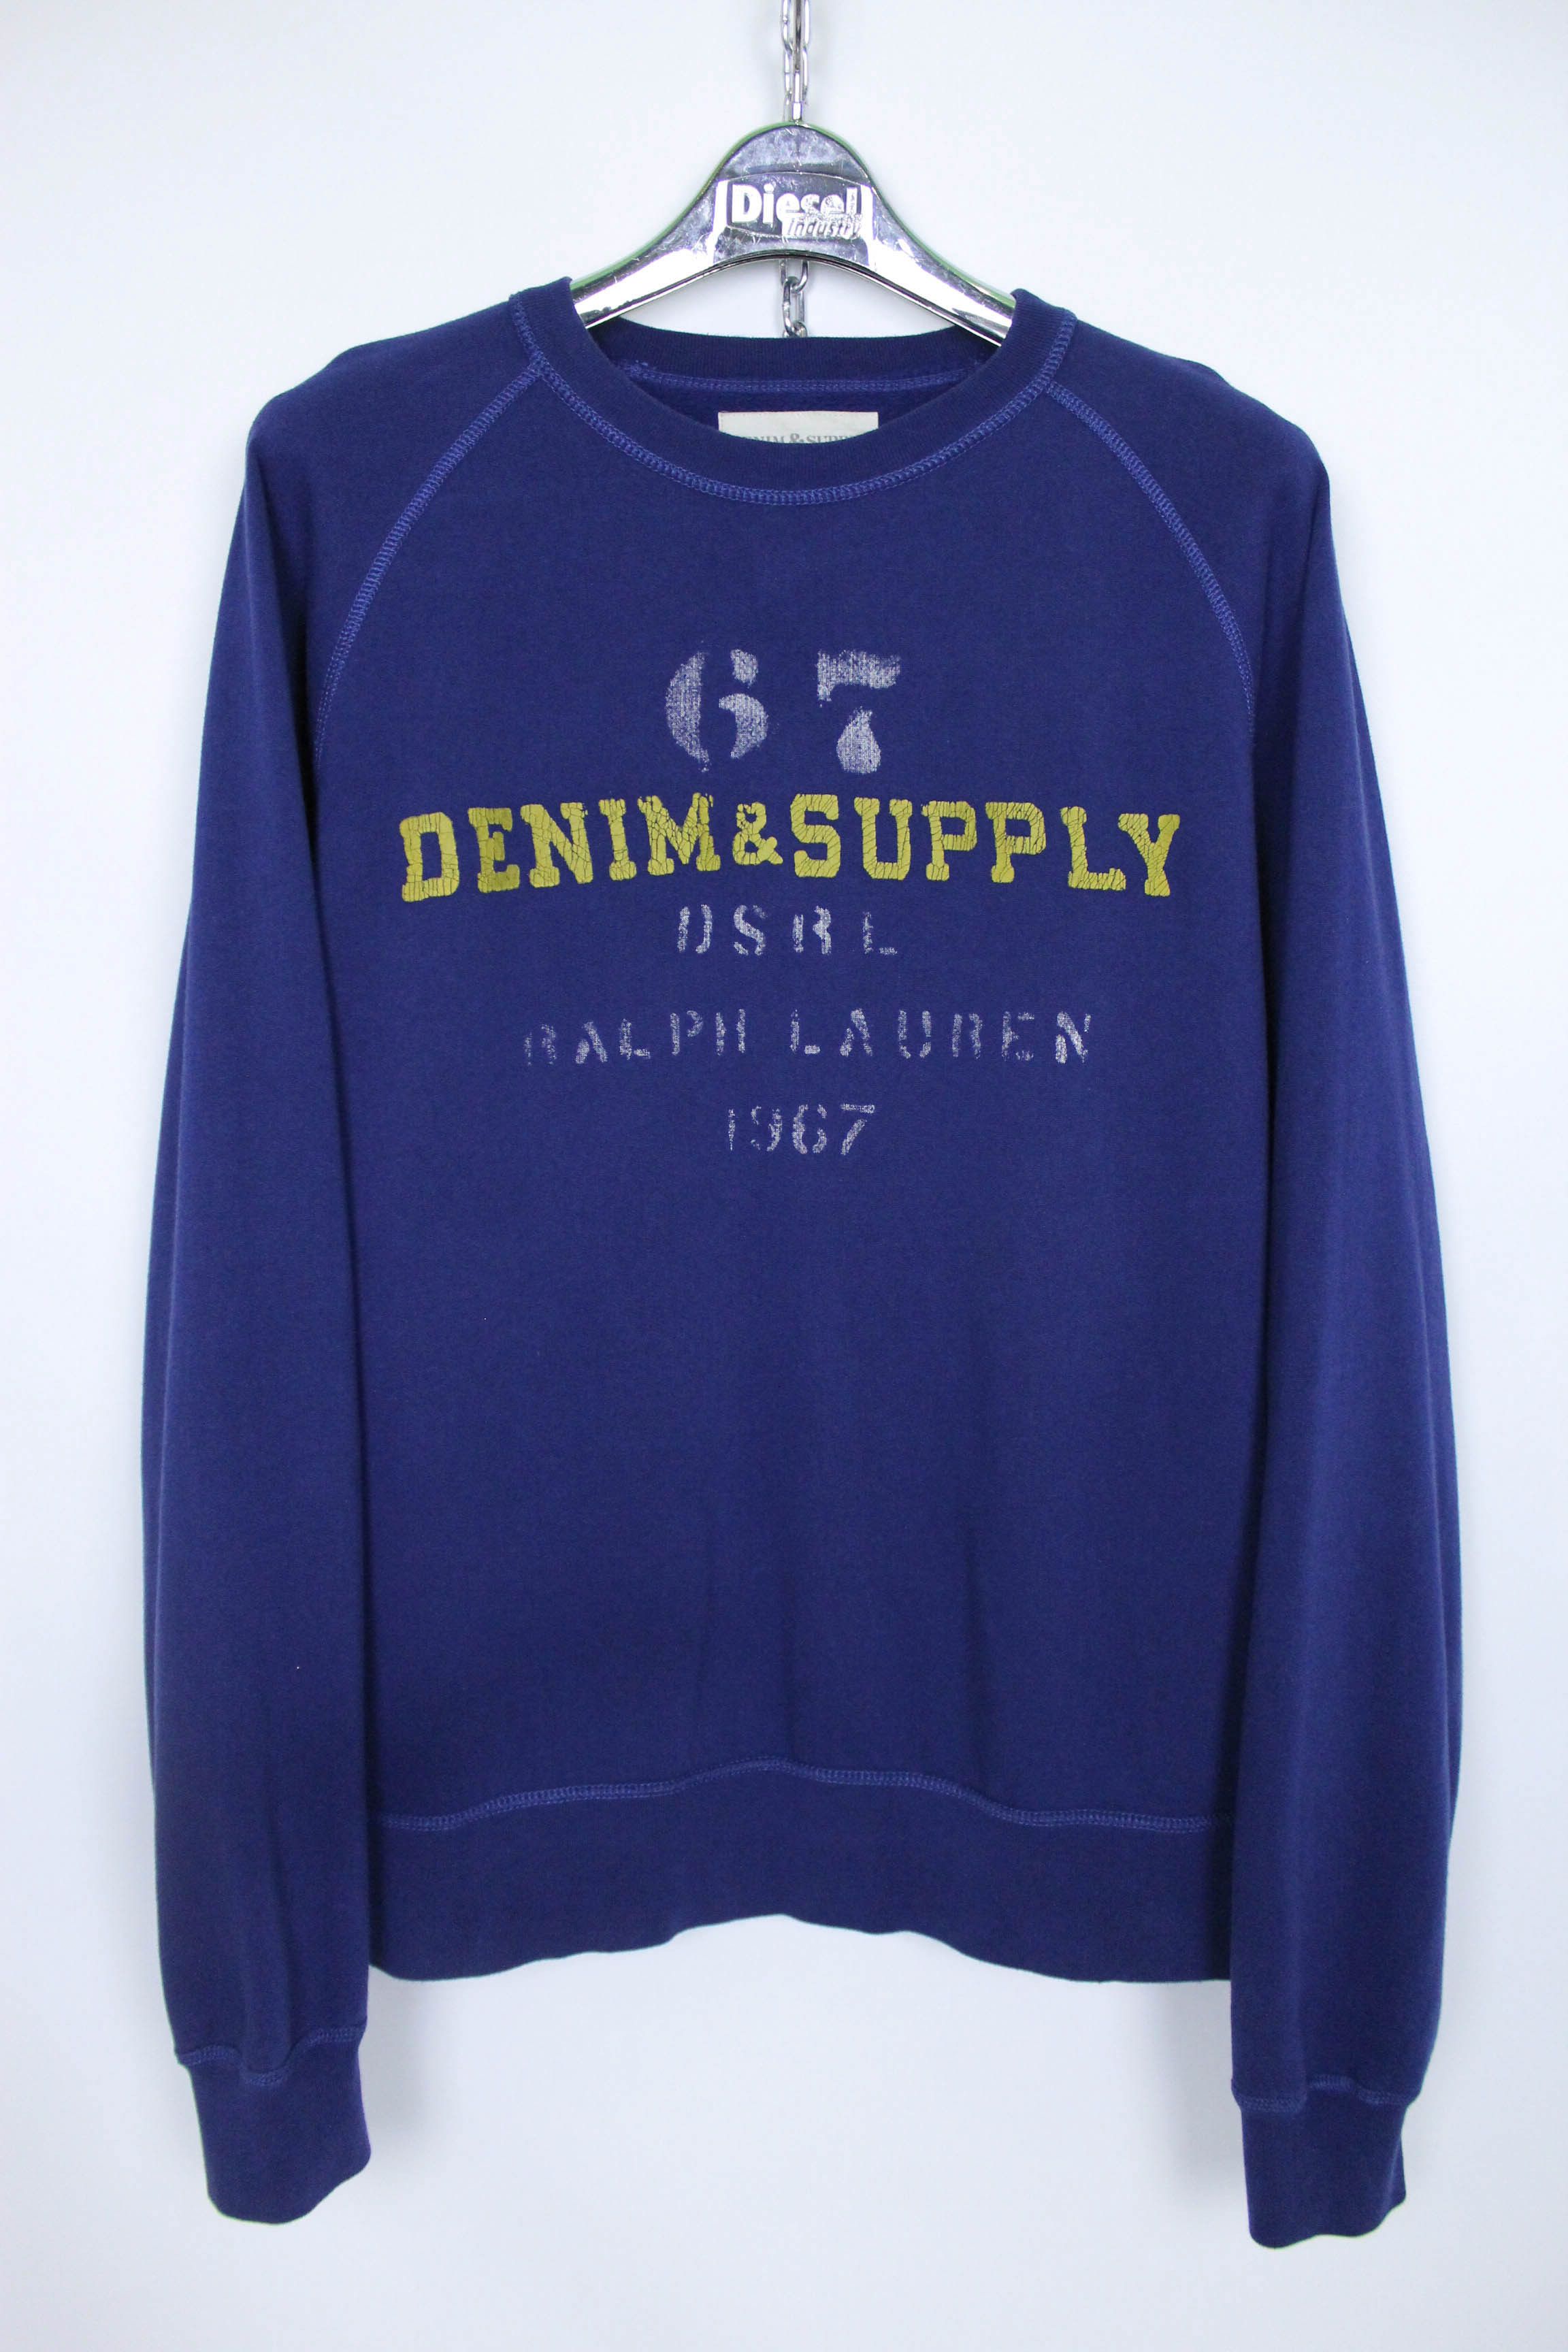 Pre-owned Denim And Supply Ralph Lauren X Polo Ralph Lauren Denim & Supply Ralph Laurent Sweatshirt Size M (fits Like L) In Navy